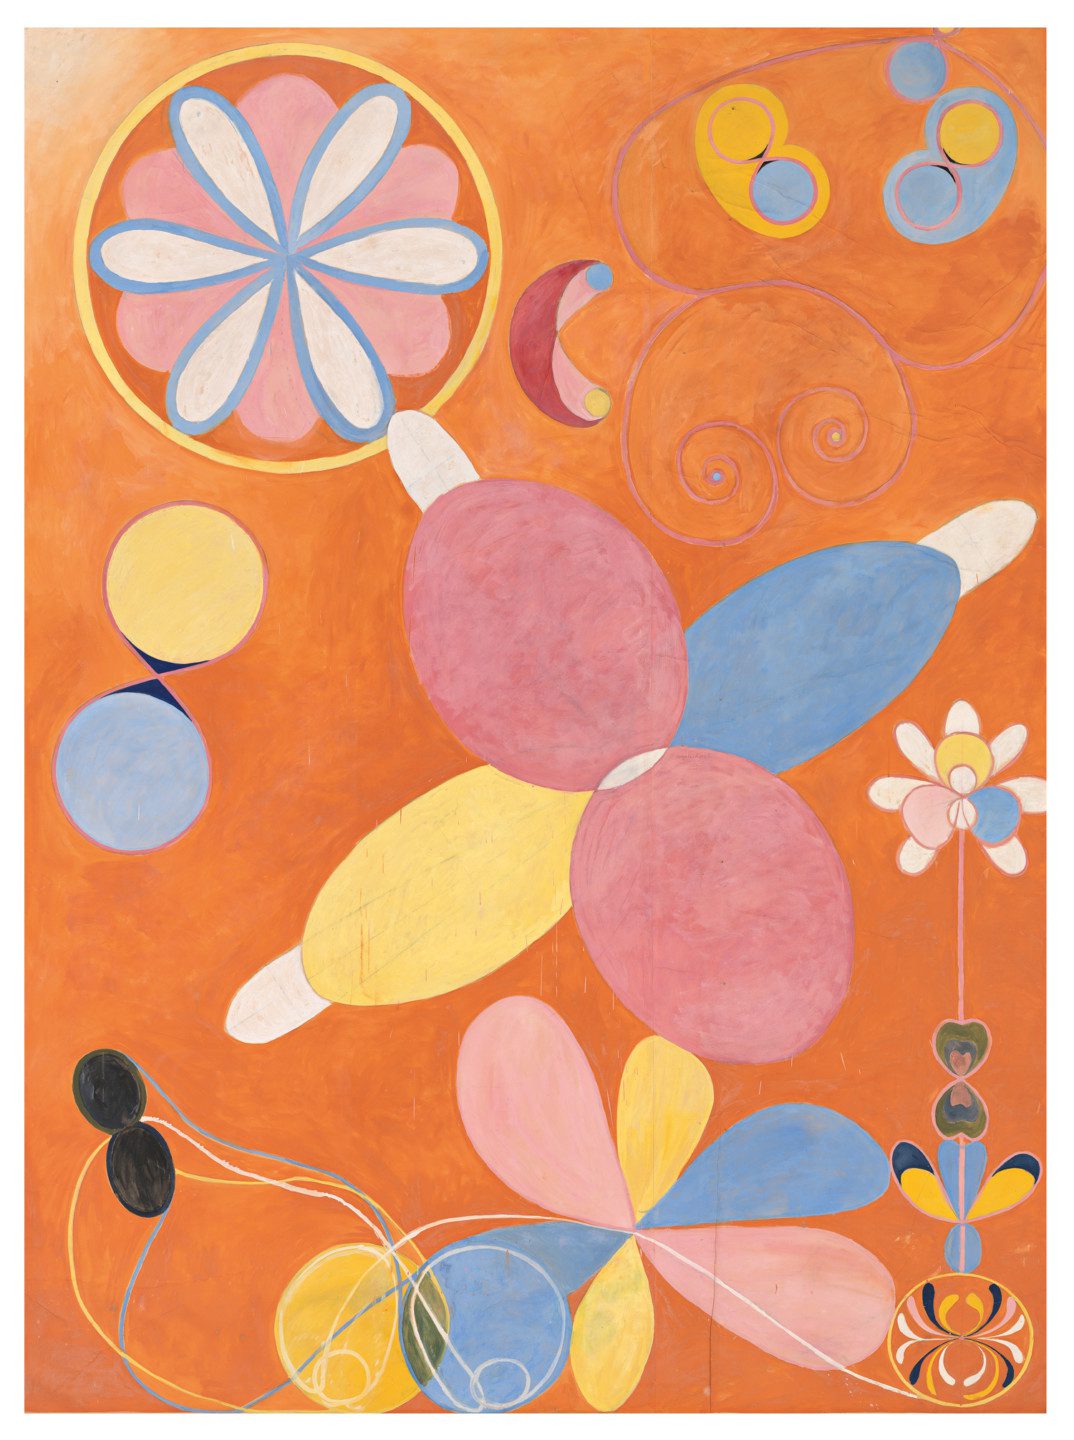  Patterns and shapes in colors like black, blue, orange and pink against an orange background